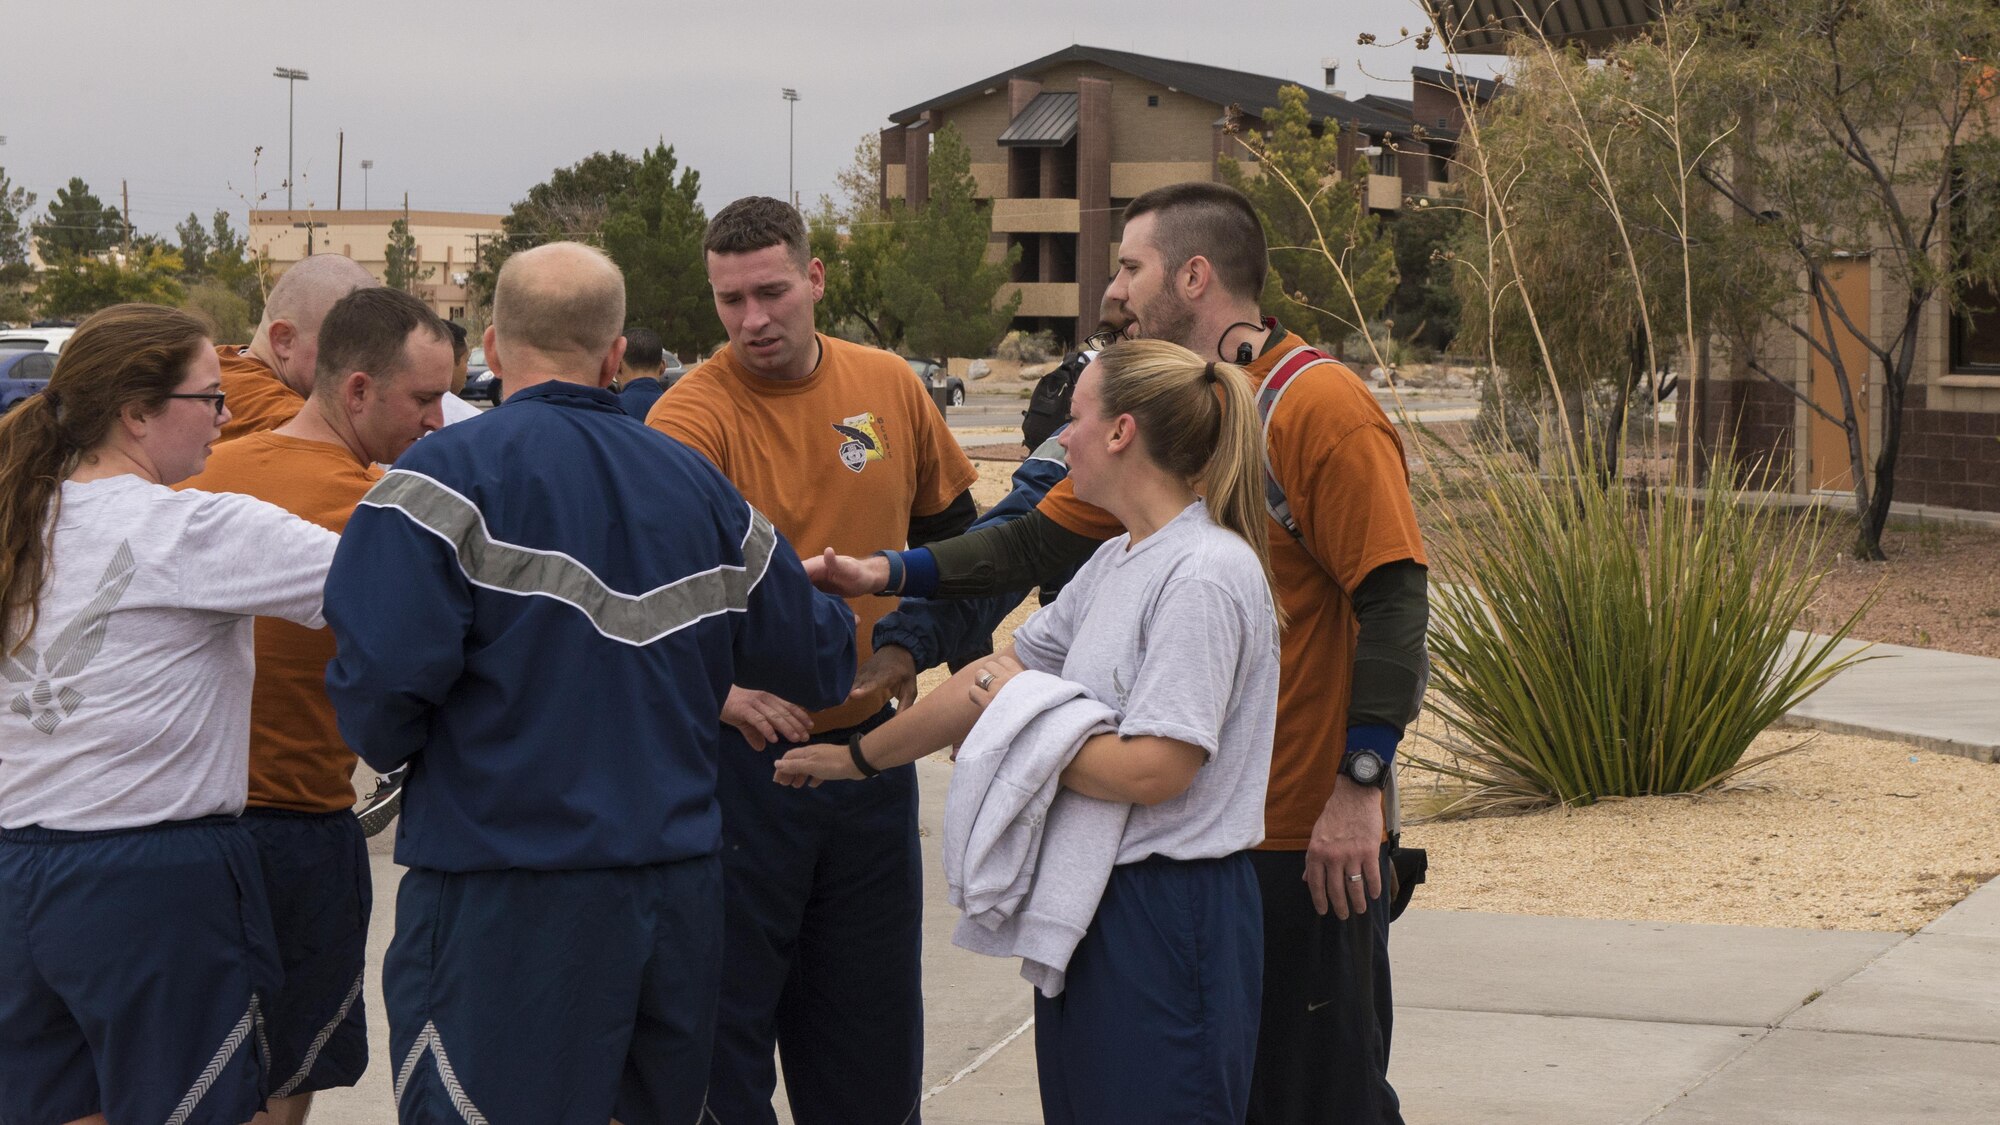 A group of participants gather for a group handshake after the 49th Force Support Squadron’s annual Turkey Trot on Nov. 21, 2016 at Holloman Air Force Base, N.M. The Turkey Trot is a 5 km run across the base trail. (U.S. Air Force photo by Airmen 1st Class Alexis P. Docherty) 

